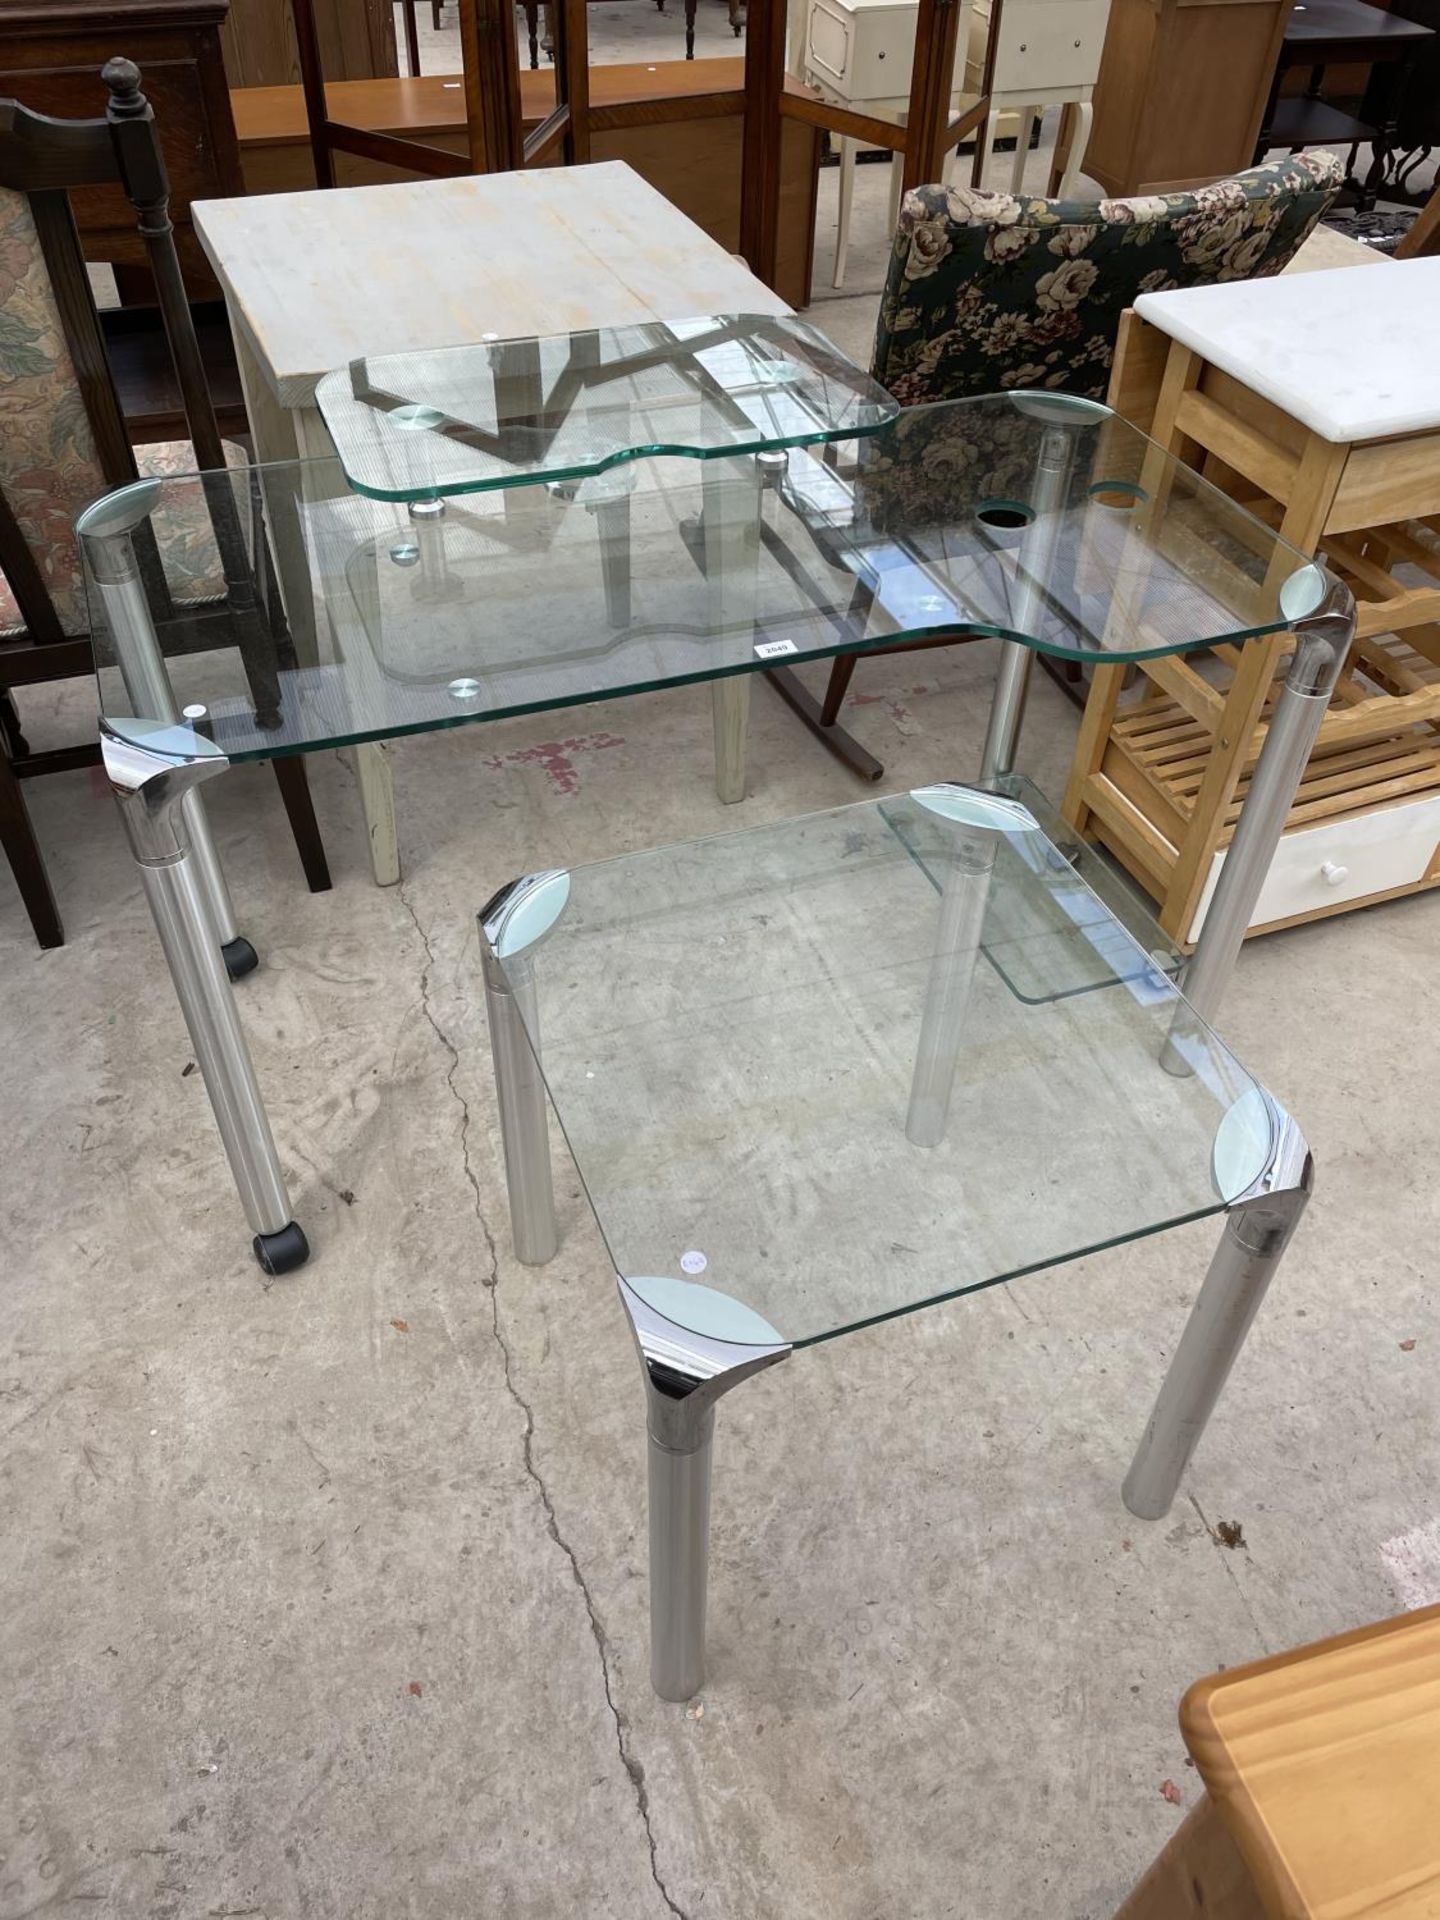 A MODERN GLASS COMPUTER TABLE AND SQUARE TABLE